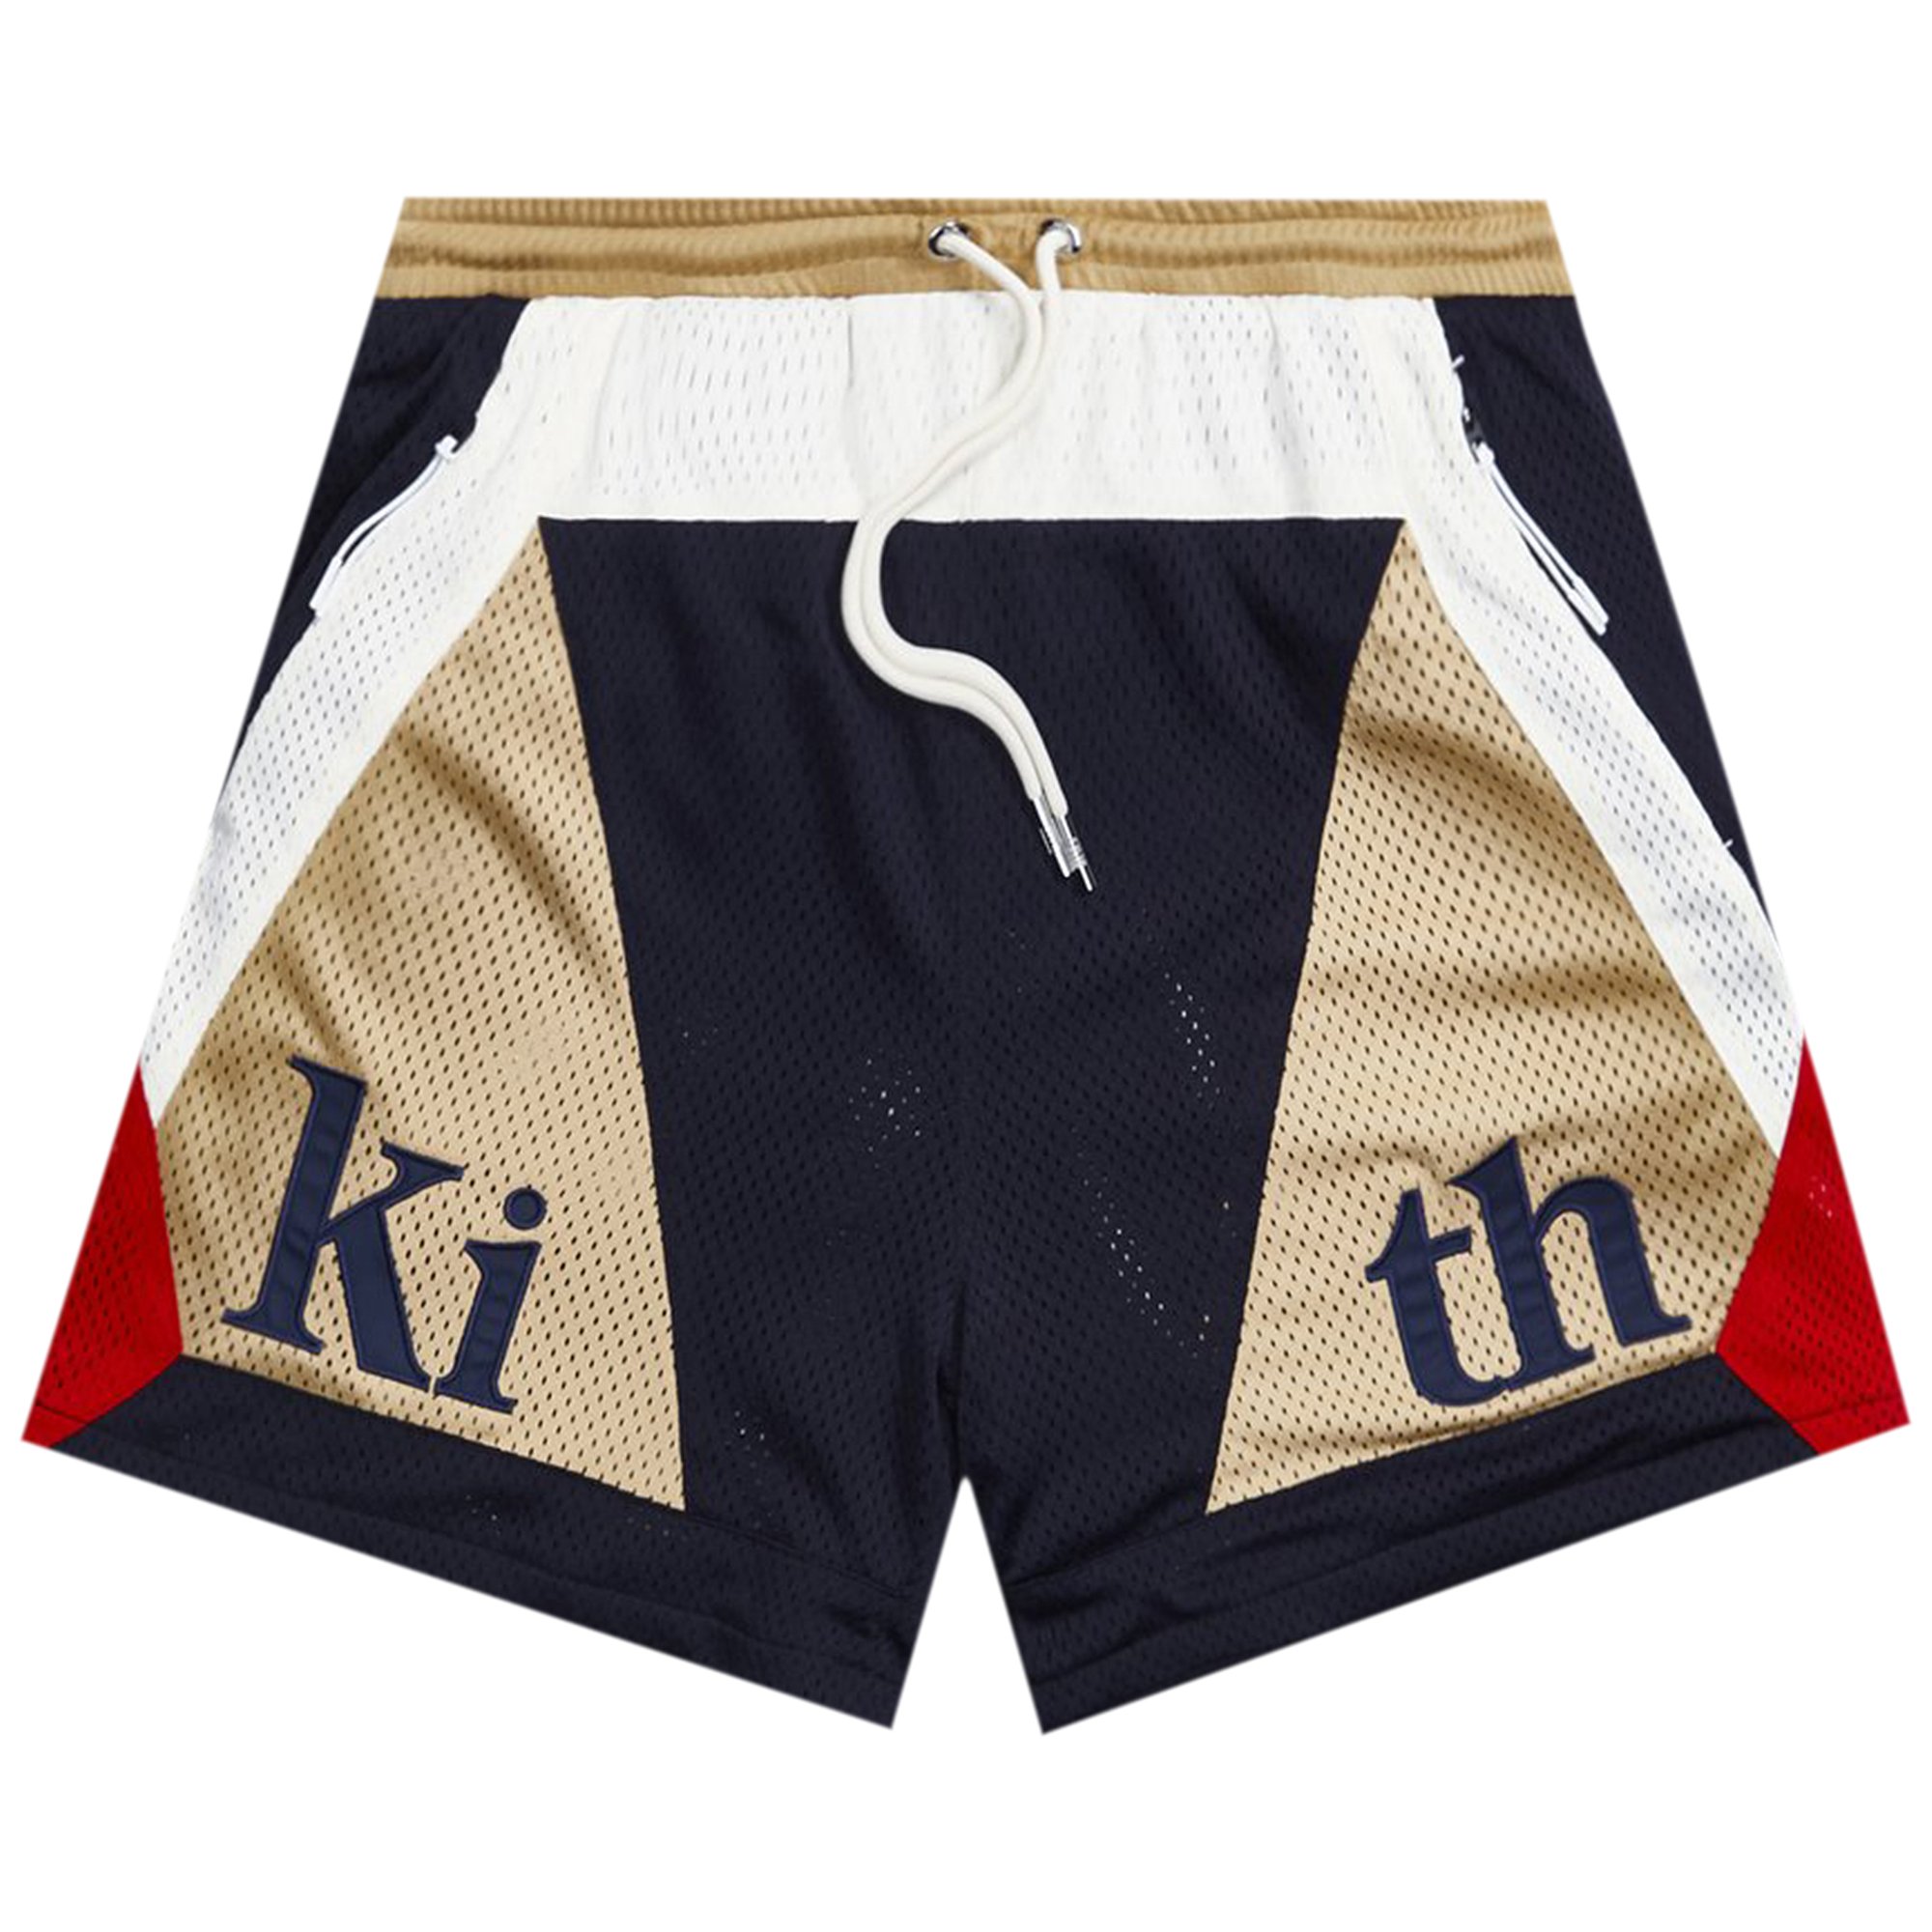 Kith Turbo Short 'Nocturnal'